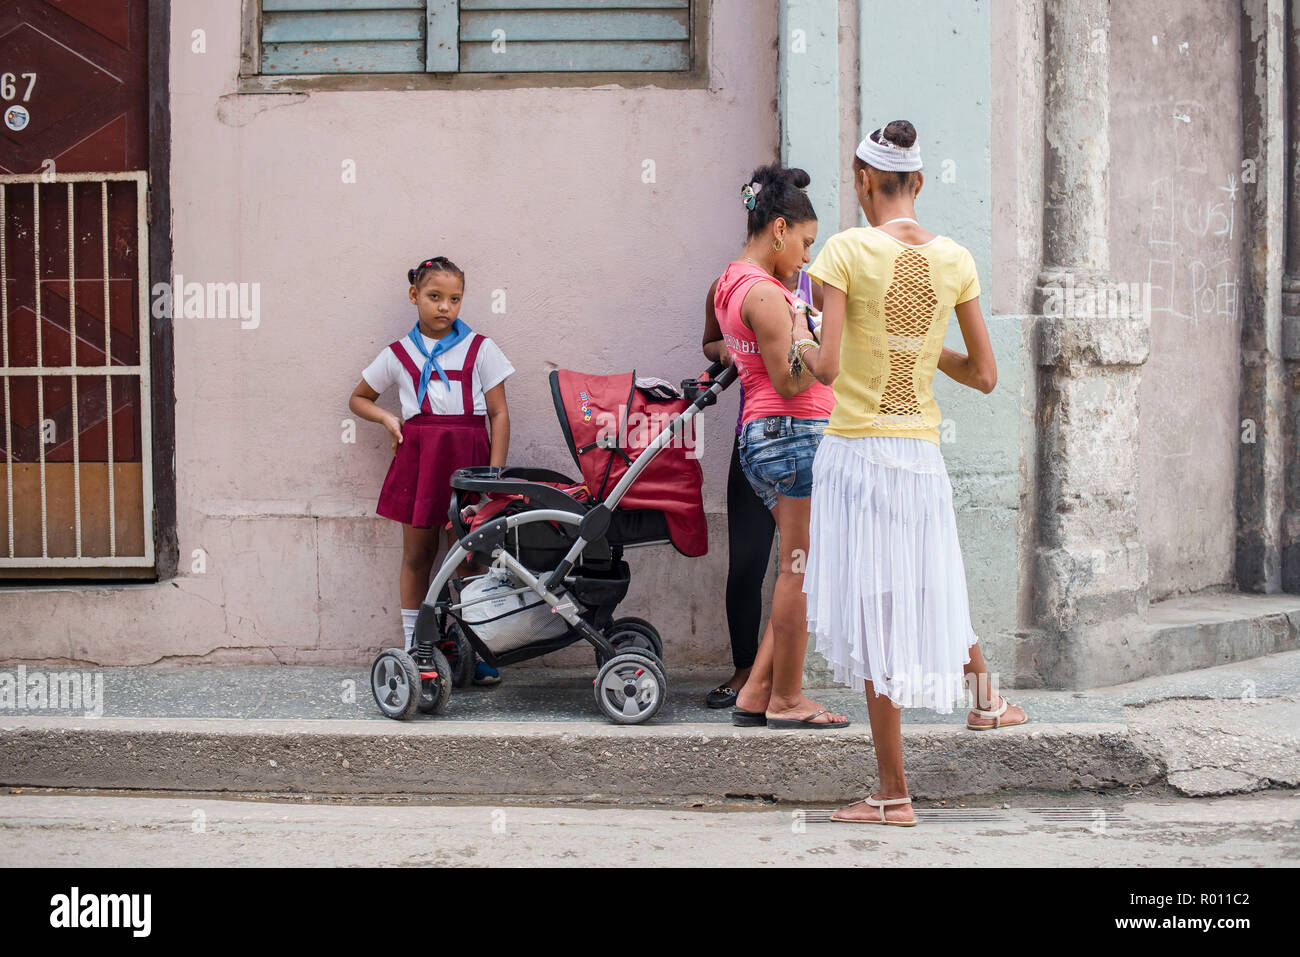 A young girl in a school uniform stands next to a stroller, ignored by the adults around her, on a street corner in Havana, Cuba. Stock Photo